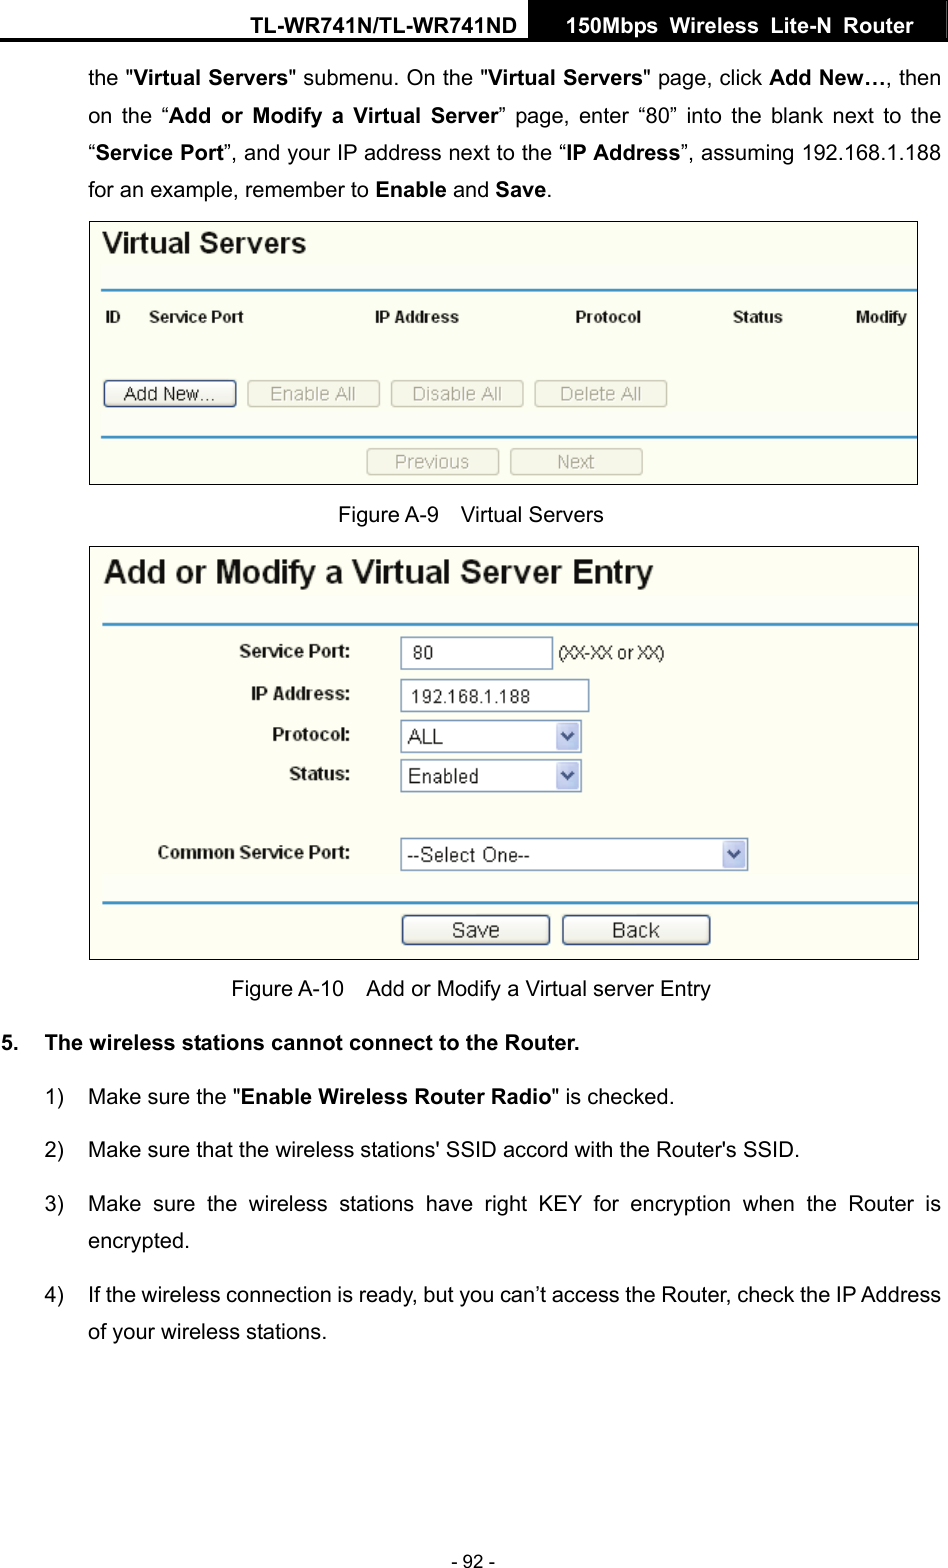 TL-WR741N/TL-WR741ND  150Mbps Wireless Lite-N Router   - 92 - the &quot;Virtual Servers&quot; submenu. On the &quot;Virtual Servers&quot; page, click Add New…, then on the “Add or Modify a Virtual Server” page, enter “80” into the blank next to the “Service Port”, and your IP address next to the “IP Address”, assuming 192.168.1.188 for an example, remember to Enable and Save.  Figure A-9  Virtual Servers  Figure A-10    Add or Modify a Virtual server Entry 5.  The wireless stations cannot connect to the Router. 1)  Make sure the &quot;Enable Wireless Router Radio&quot; is checked. 2)  Make sure that the wireless stations&apos; SSID accord with the Router&apos;s SSID. 3)  Make sure the wireless stations have right KEY for encryption when the Router is encrypted. 4)  If the wireless connection is ready, but you can’t access the Router, check the IP Address of your wireless stations. 